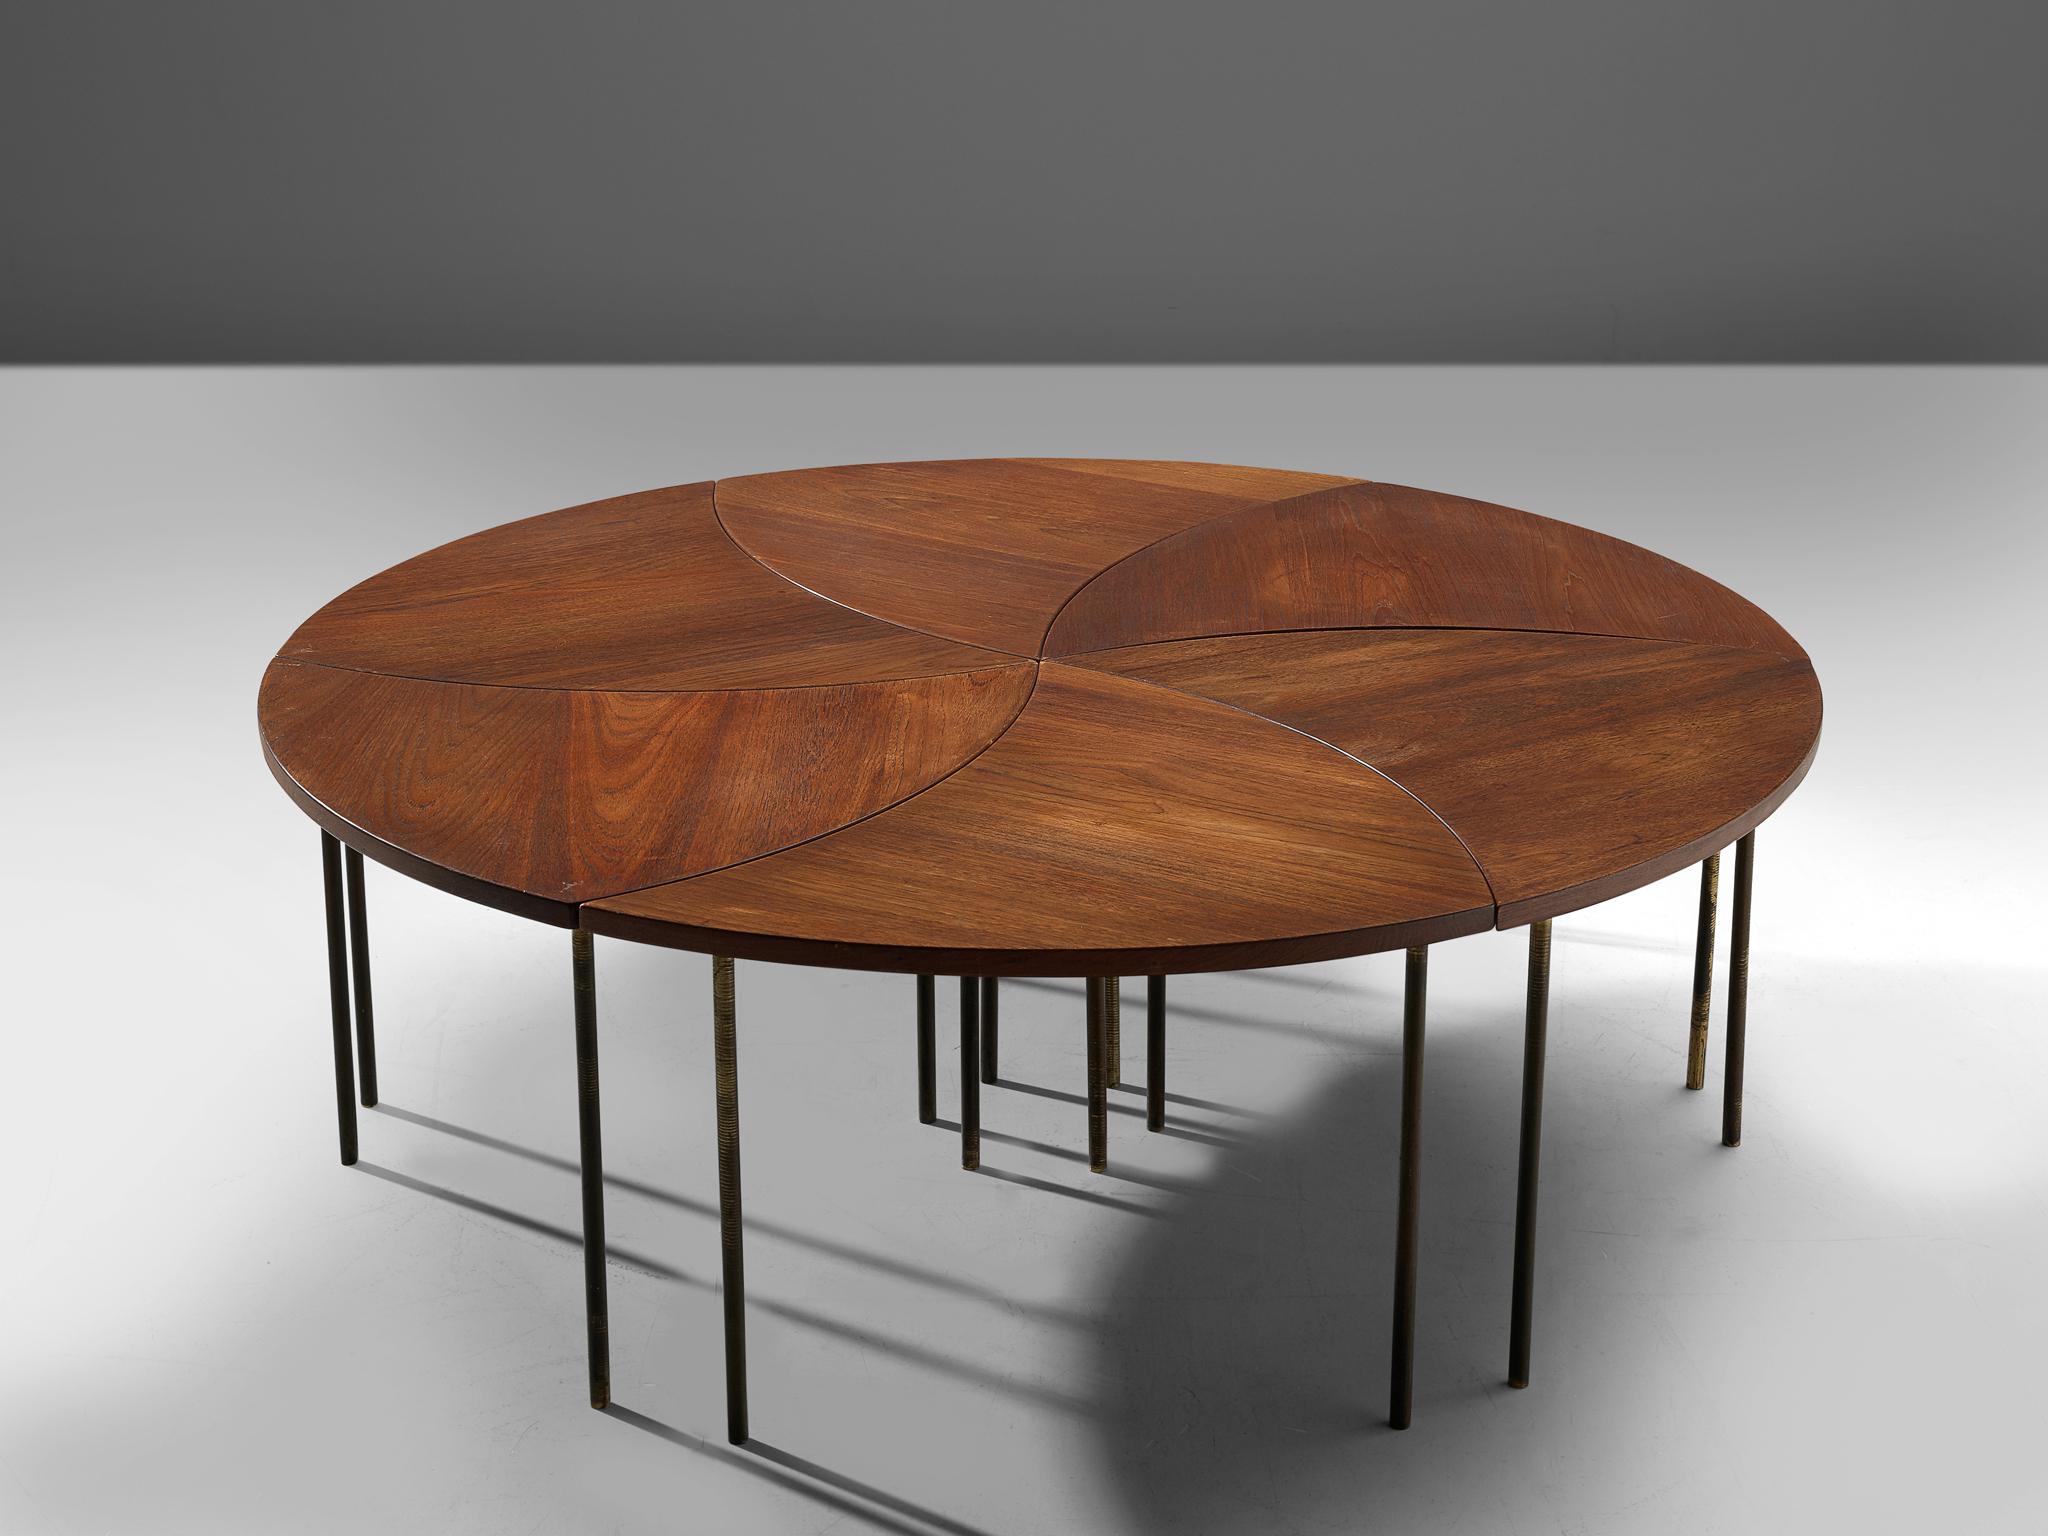 Peter Hvidt and Orla Mølgaard Nielsen, '523' coffee table, teak and brass, Denmark, 1950s

A modular coffee table, consisting of 6 pieces that form together one large round coffee table. The legs are made of brass and for all together (18 legs in